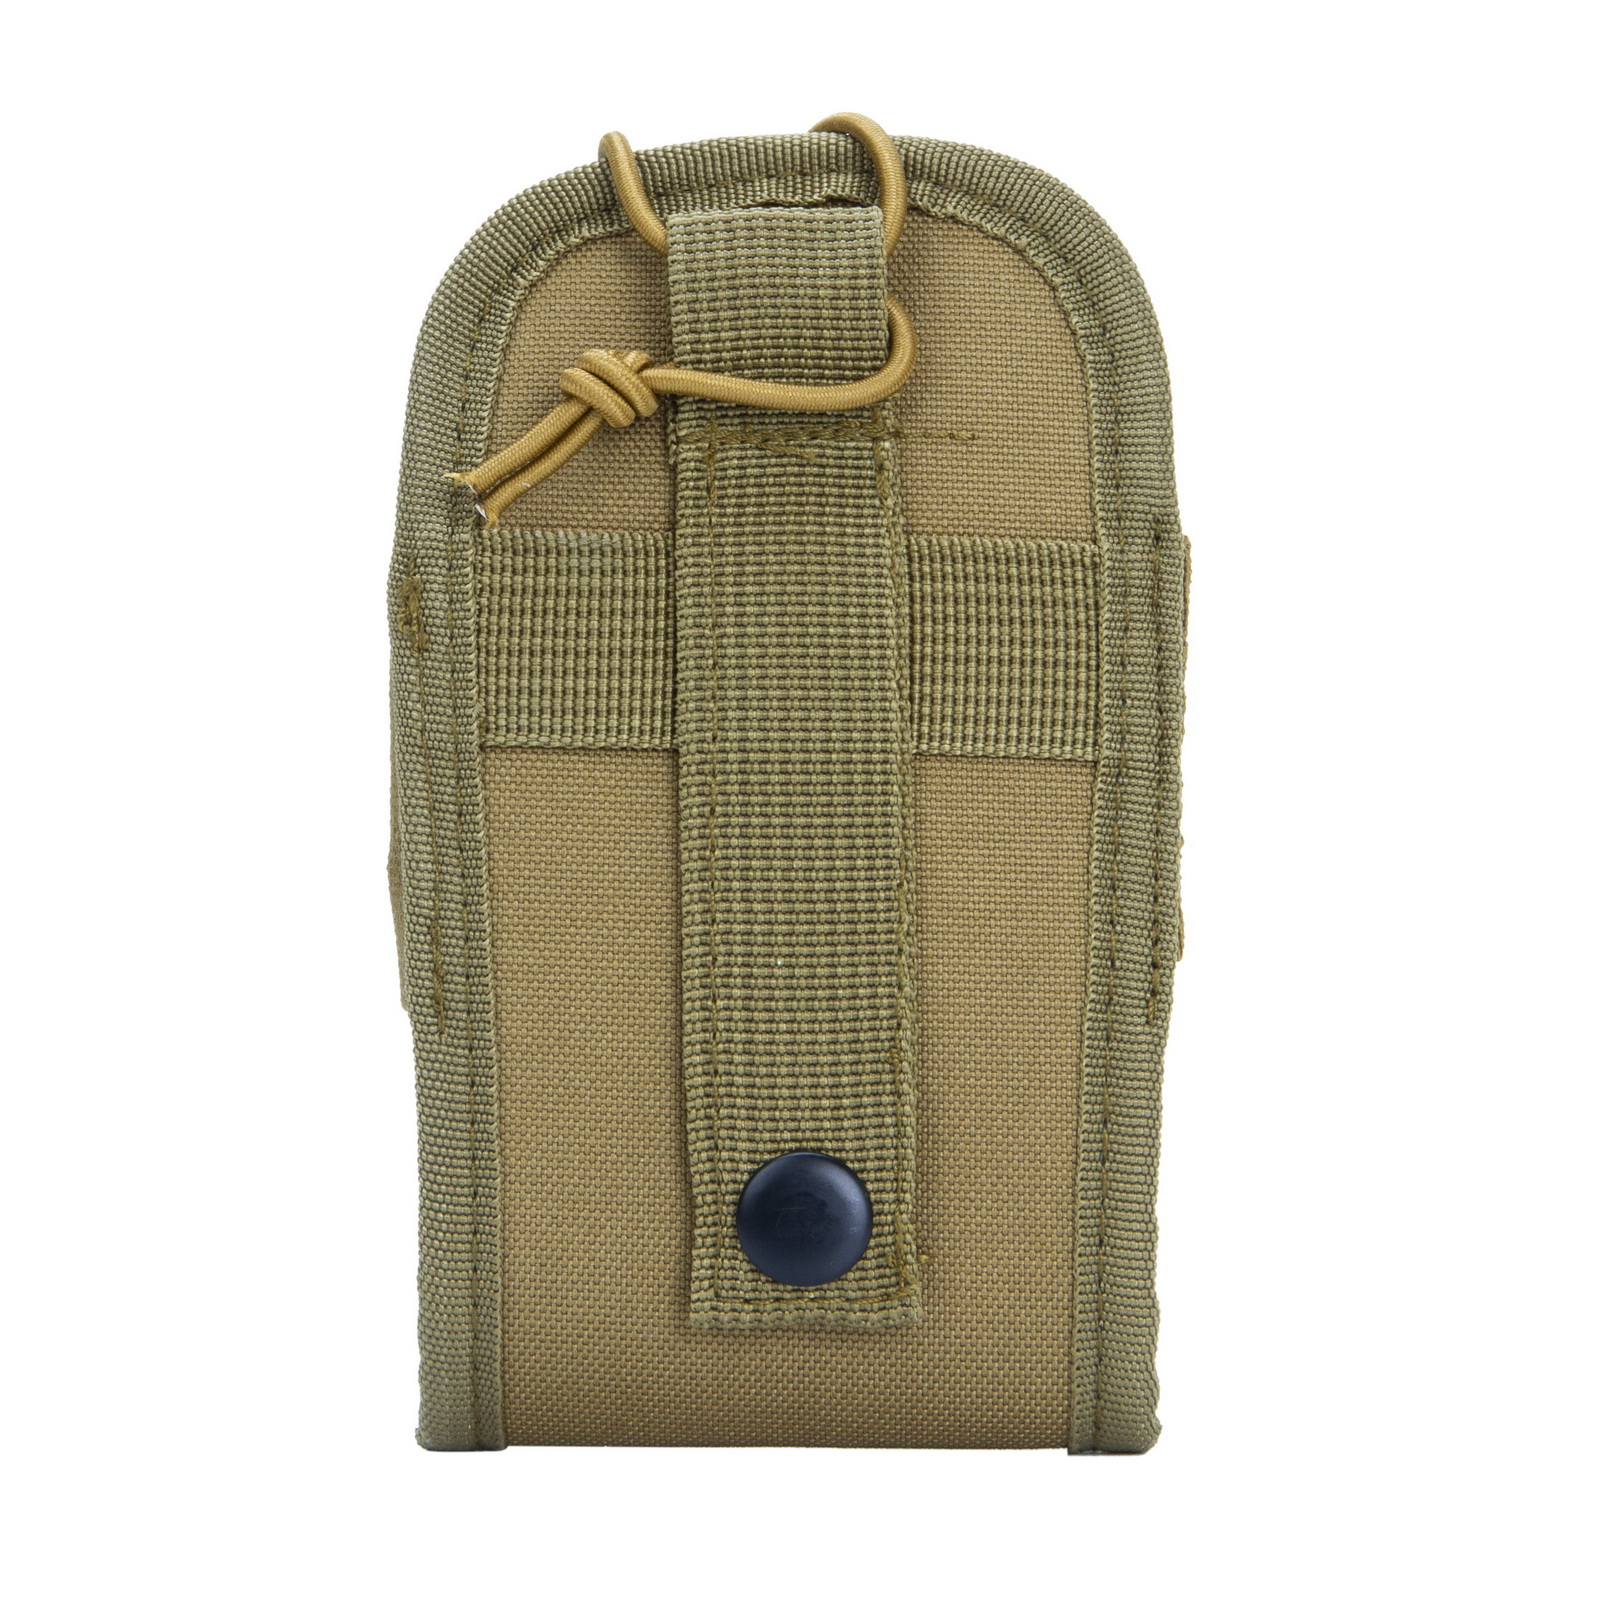 600D-Tactical-Molle-Radio-Walkie-Talkie-Pouch-Waist-Bag-Portable-Interphone-Holster-Carry-Bag-for-Hu-1925699-4